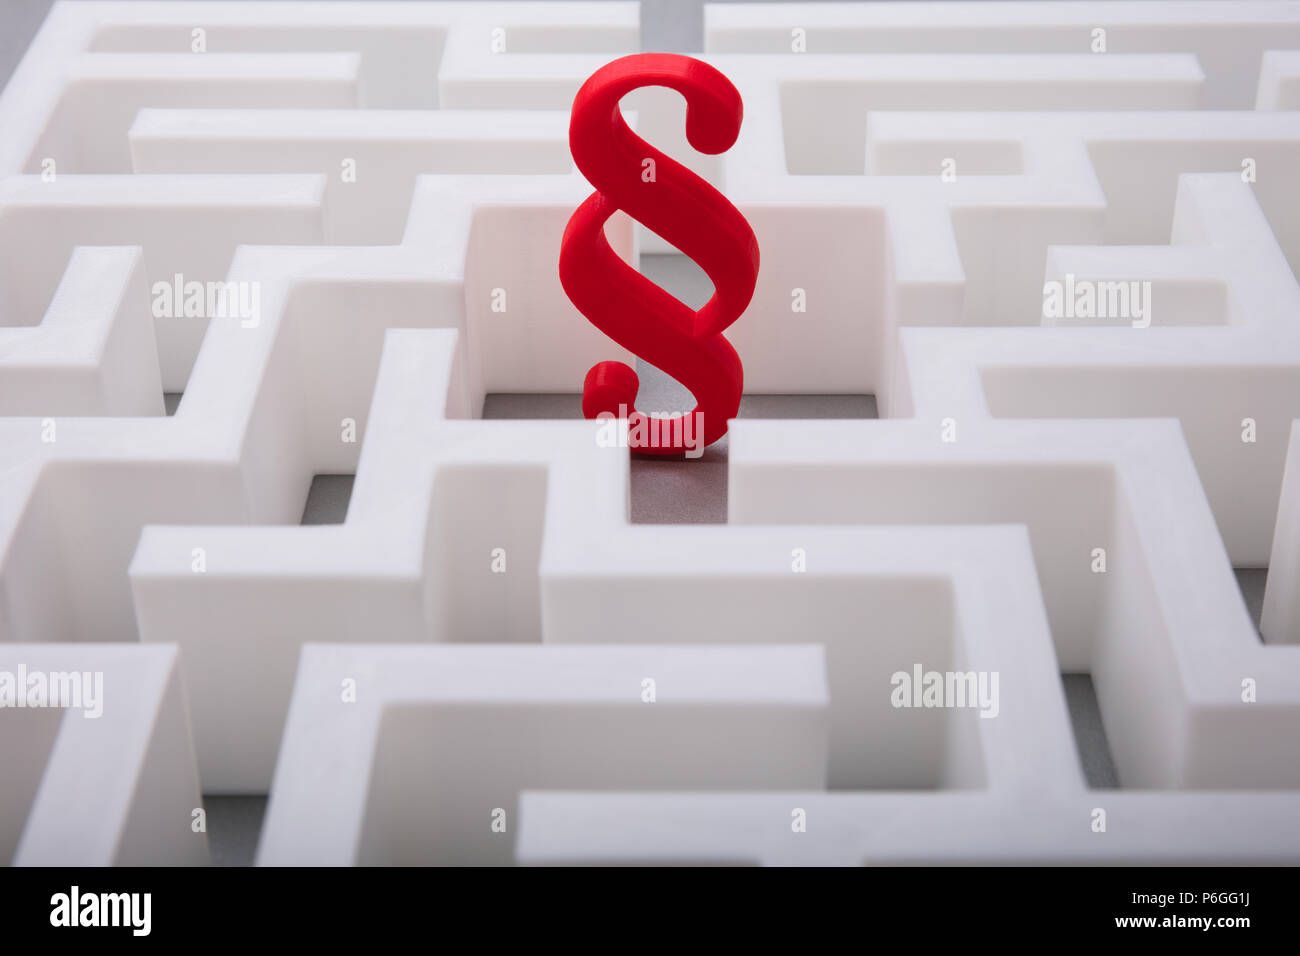 Elevated View Of Red Paragraph Symbol In The Centre Of White Maze Stock Photo